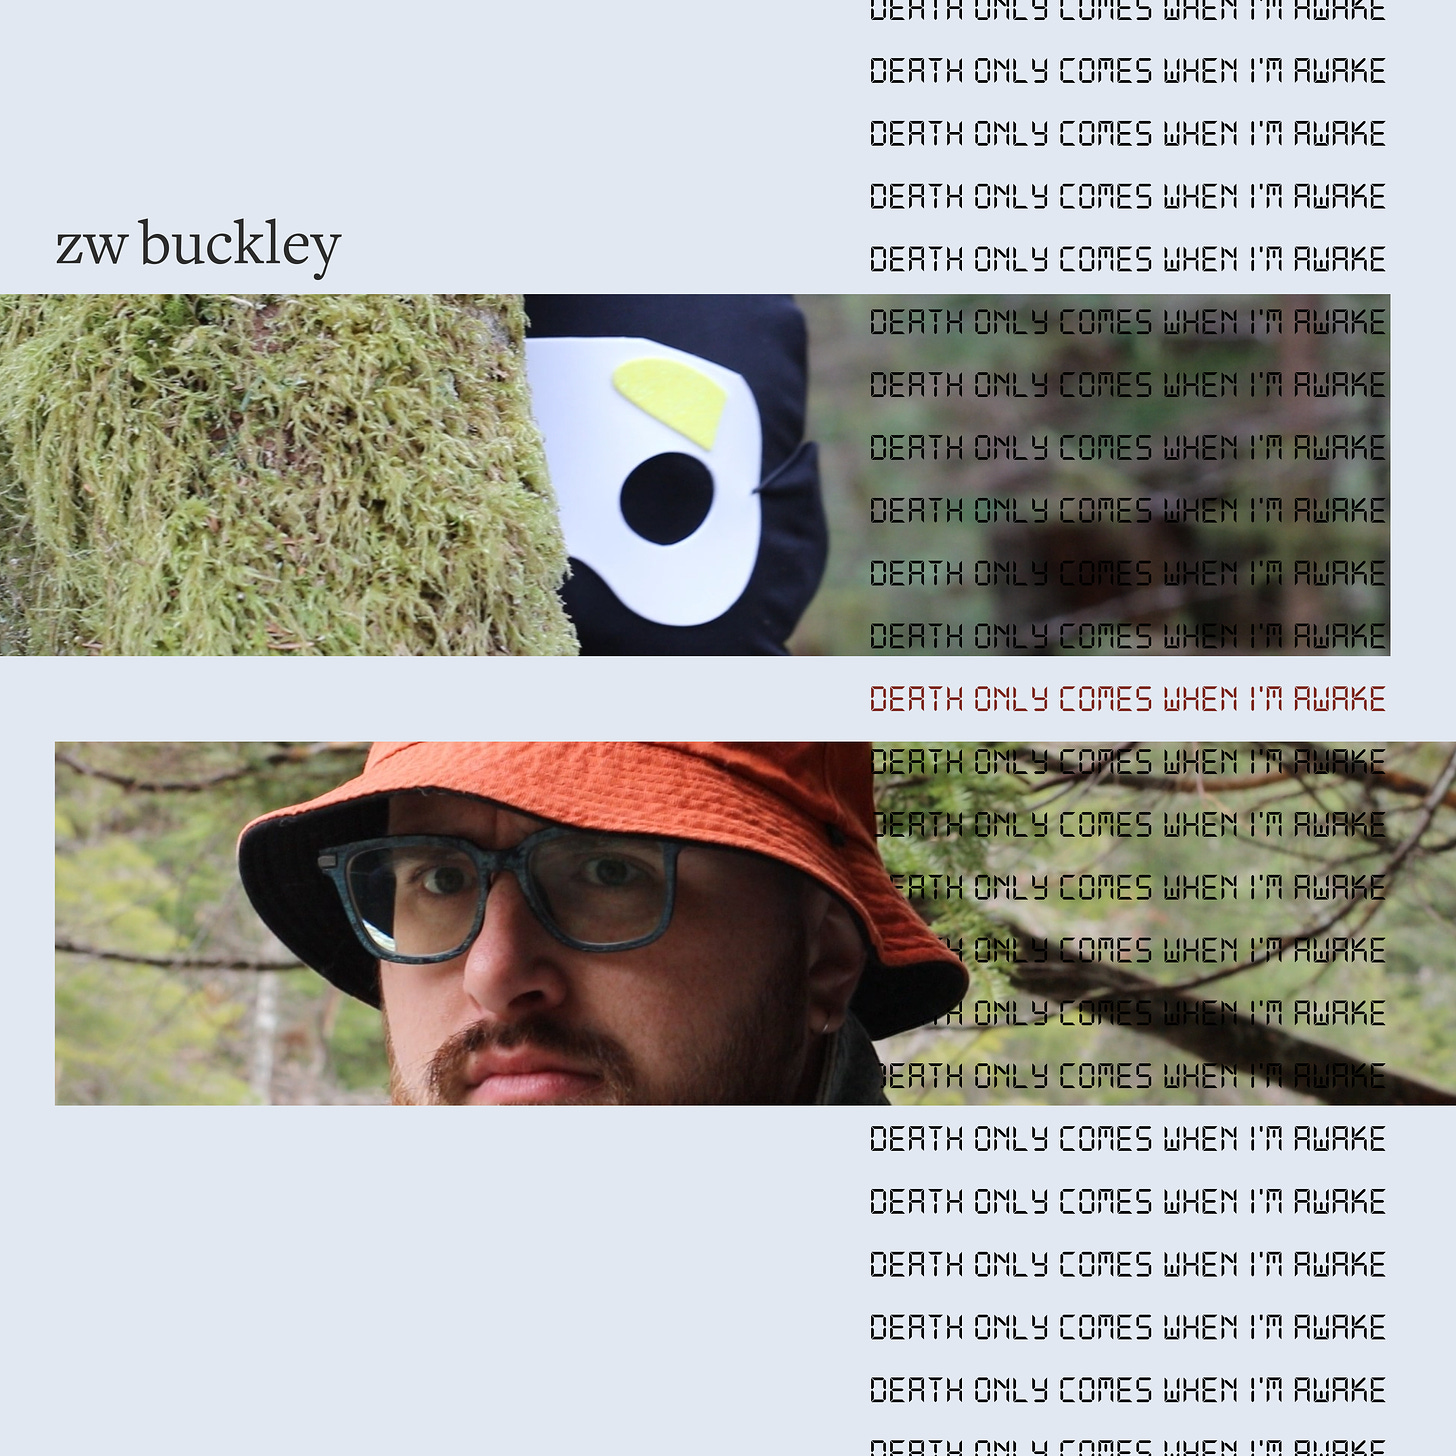 Single cover for Death Only Comes When I'm Awake featuring two images. One is of a masked figure creeping out from behind a tree and the other image is me wearing a sick fucking bucket hat.